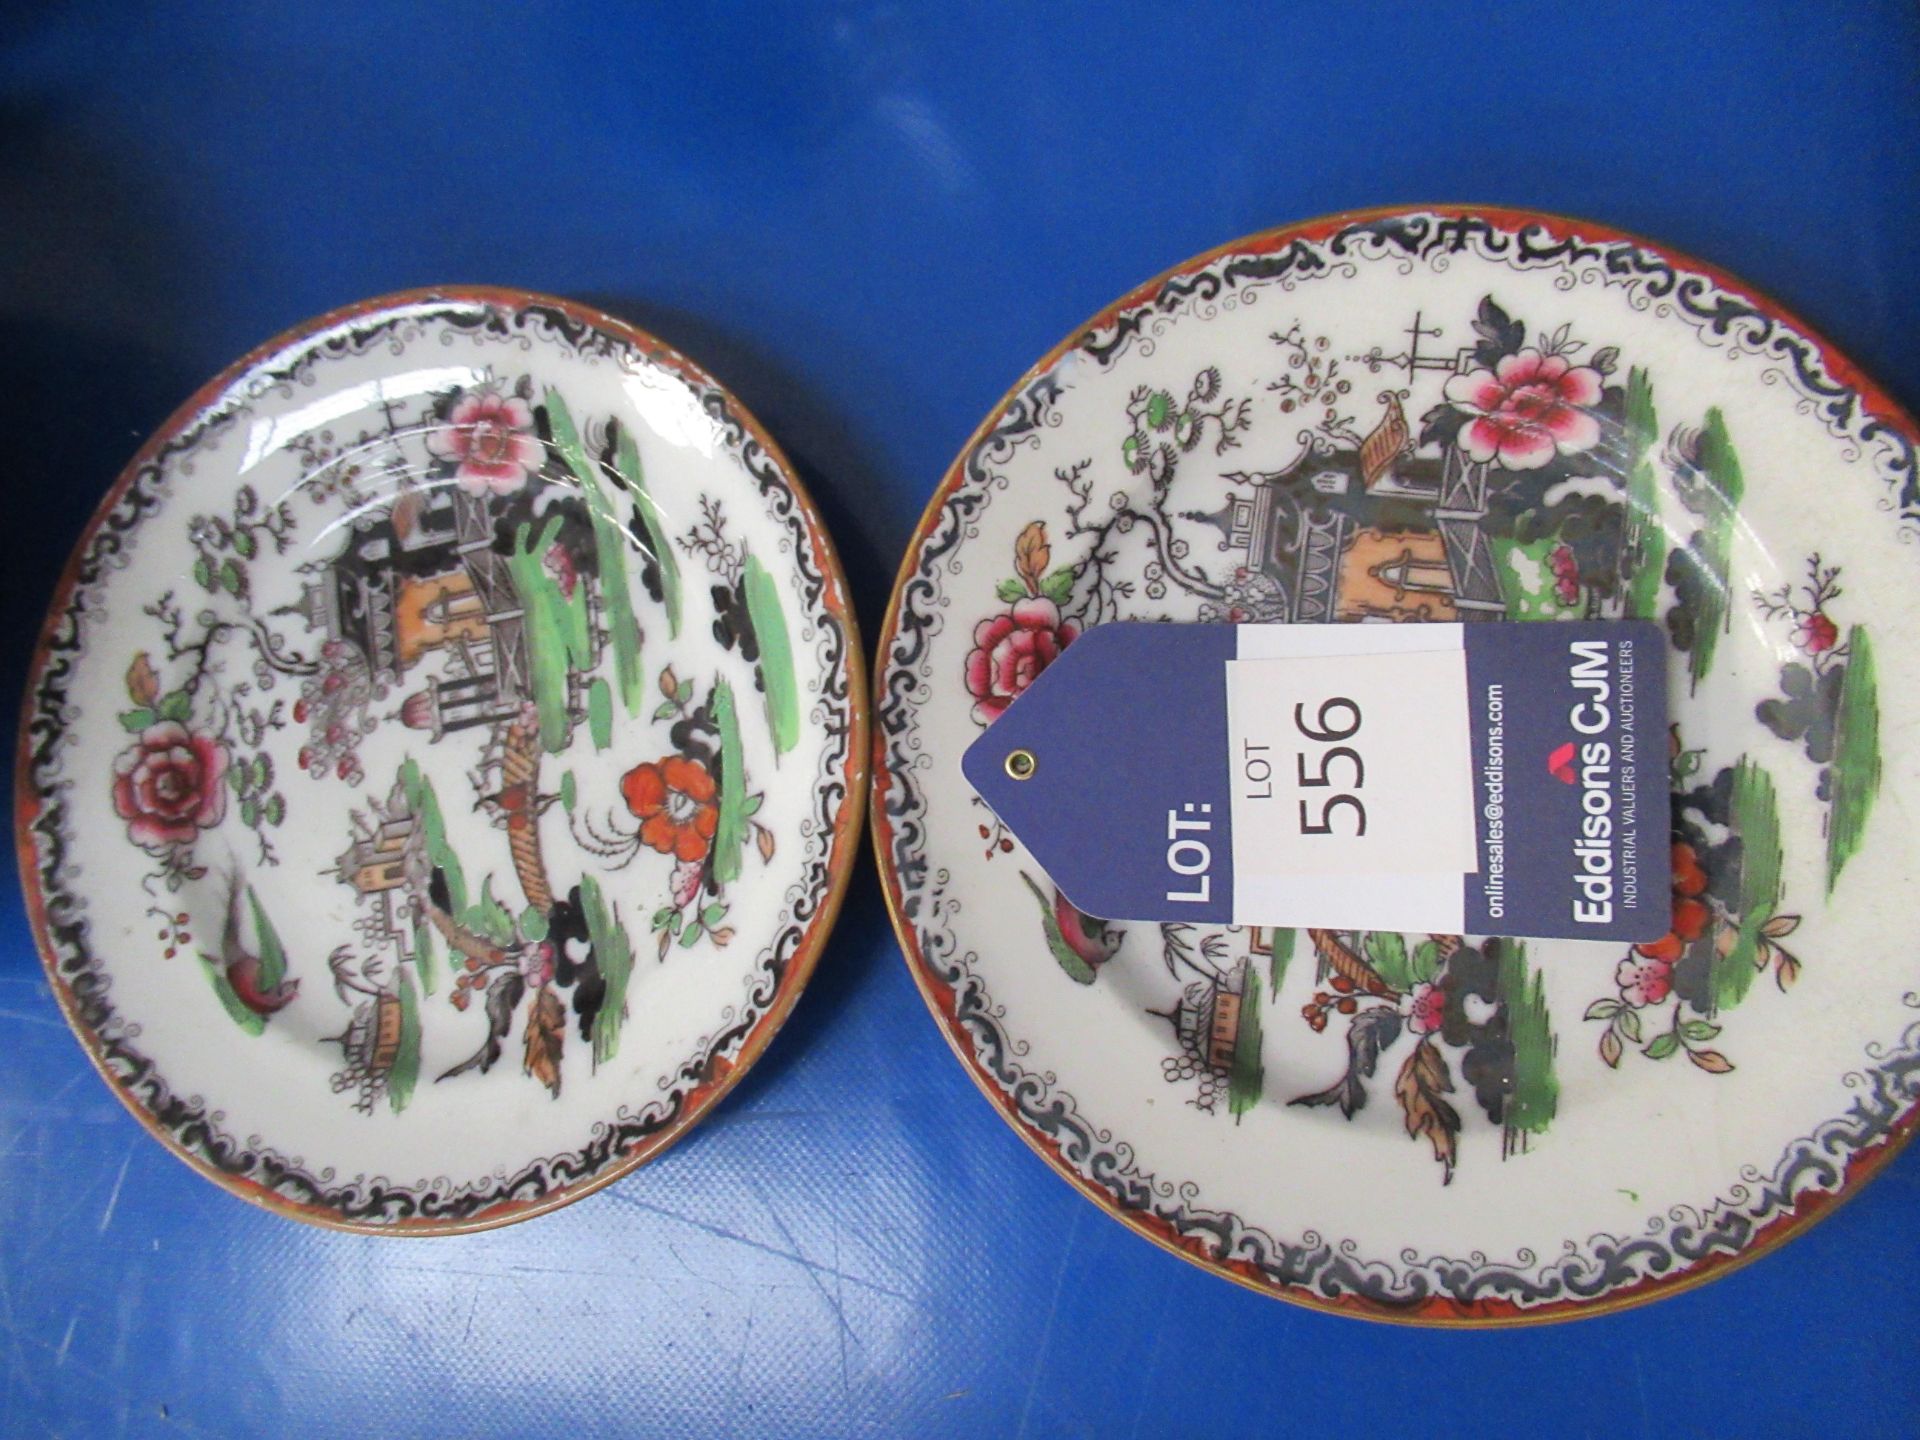 Ceramics including Serving Tray and Dishes, Vases, Bowls etc - Image 4 of 7